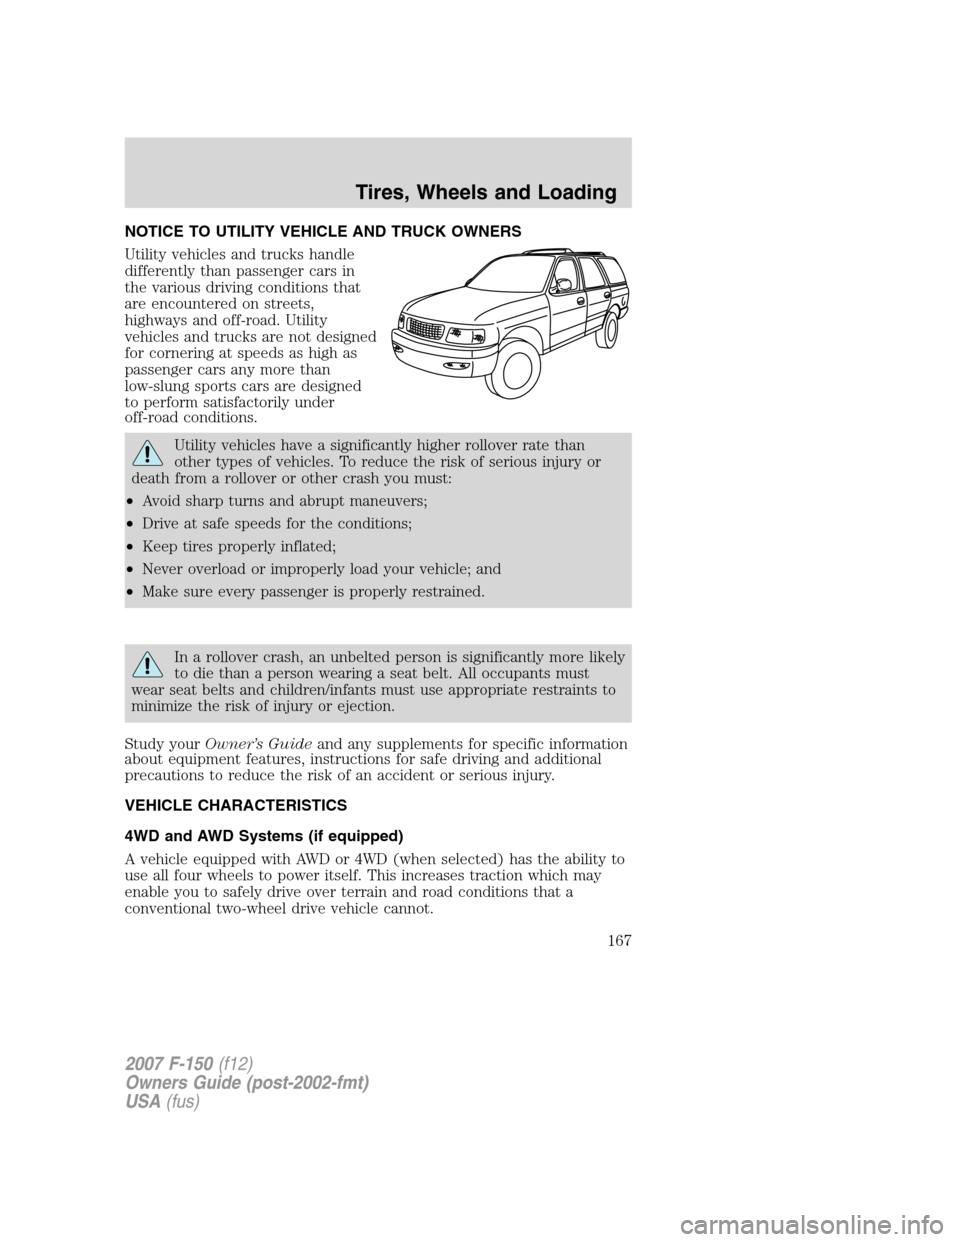 FORD F150 2007 11.G Owners Manual NOTICE TO UTILITY VEHICLE AND TRUCK OWNERS
Utility vehicles and trucks handle
differently than passenger cars in
the various driving conditions that
are encountered on streets,
highways and off-road. 